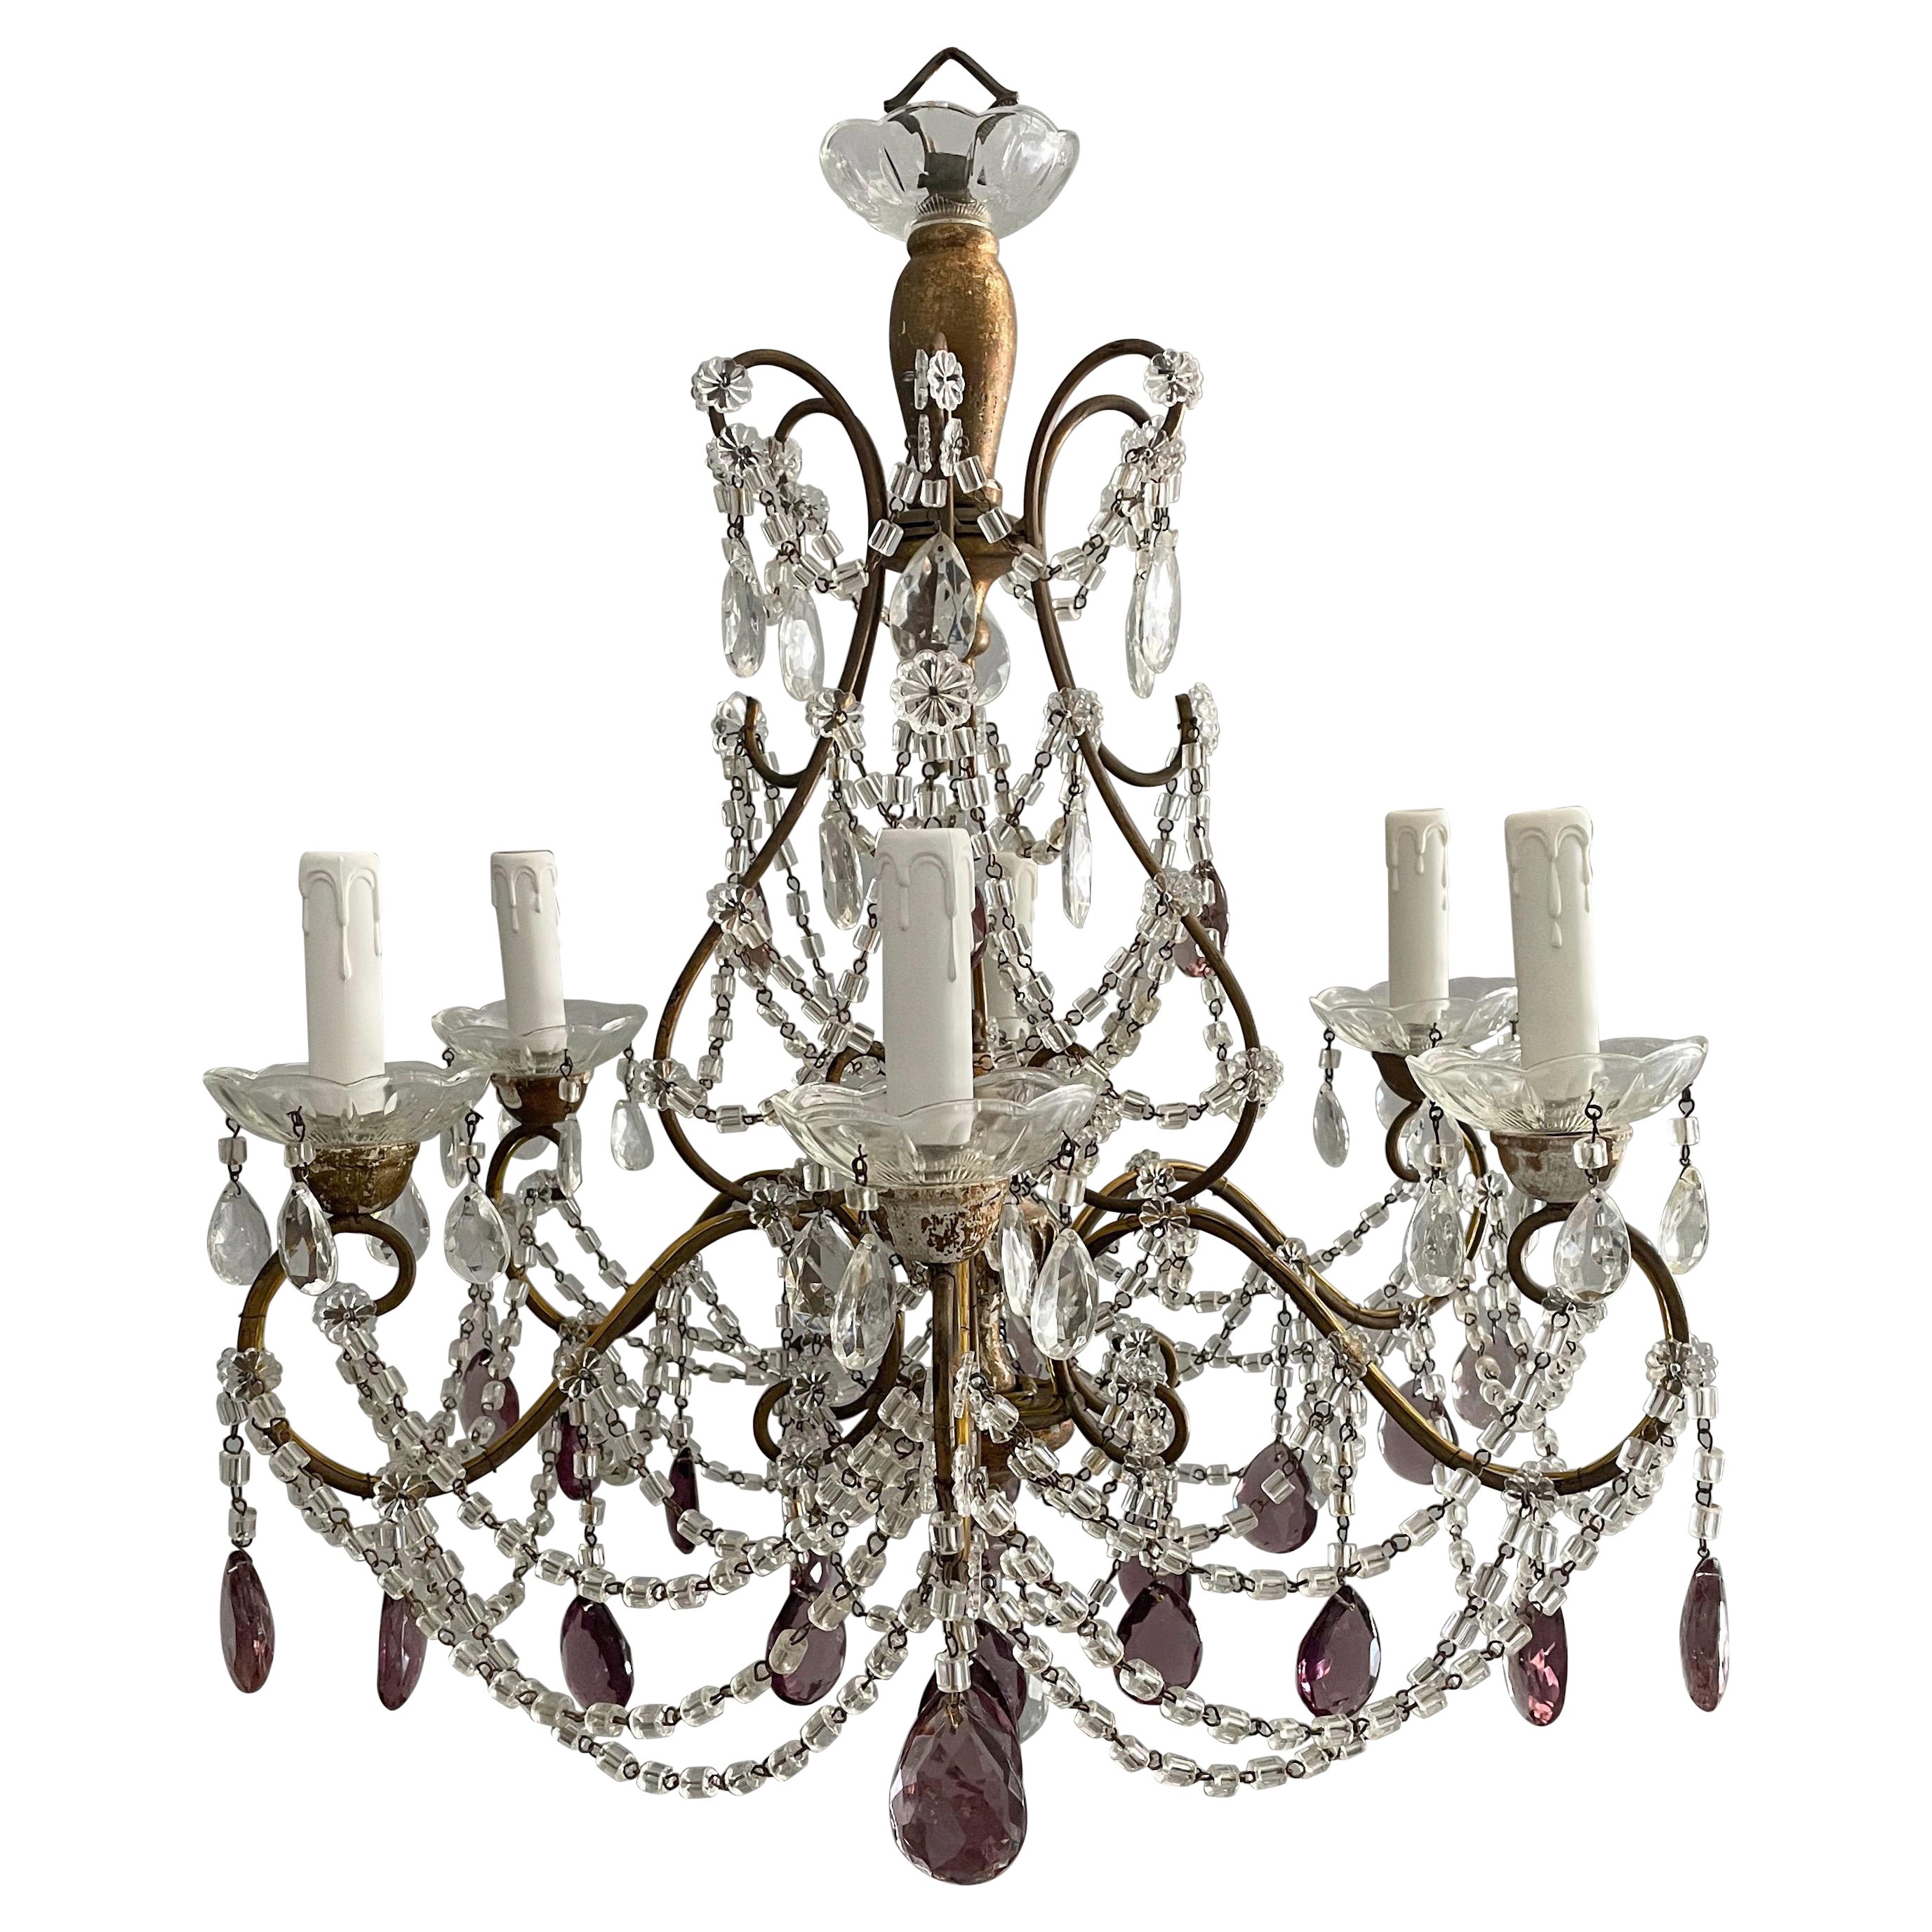 Italian Gilt Iron and Crystal Chandelier with Amethyst Prisms